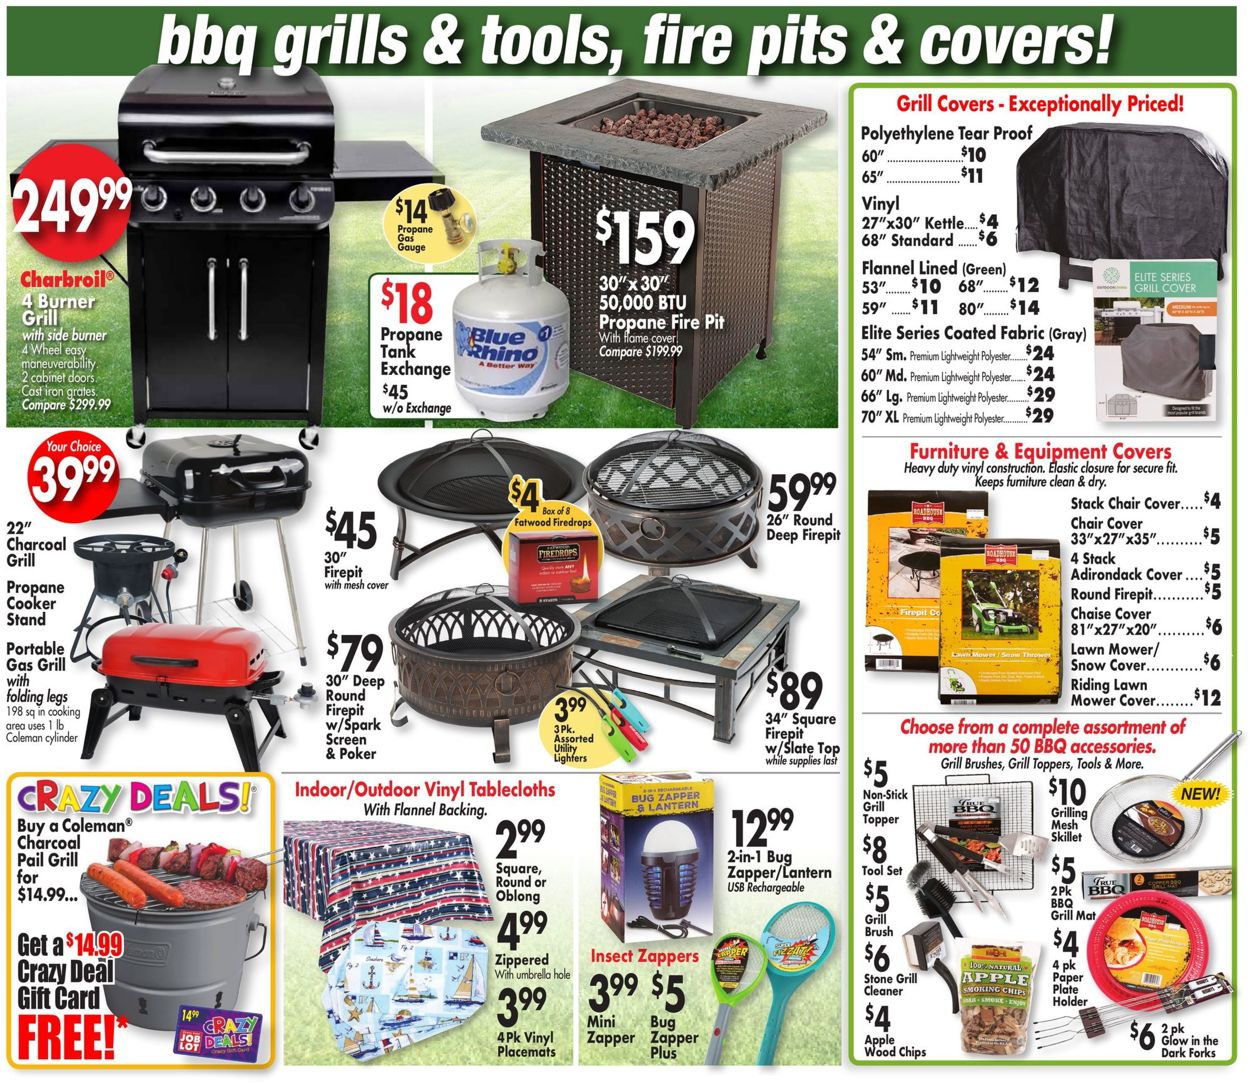 Ocean State Job Lot Current weekly ad 05/09 - 05/15/2019 [7] - frequent Ocean State Job Lot Grill Covers